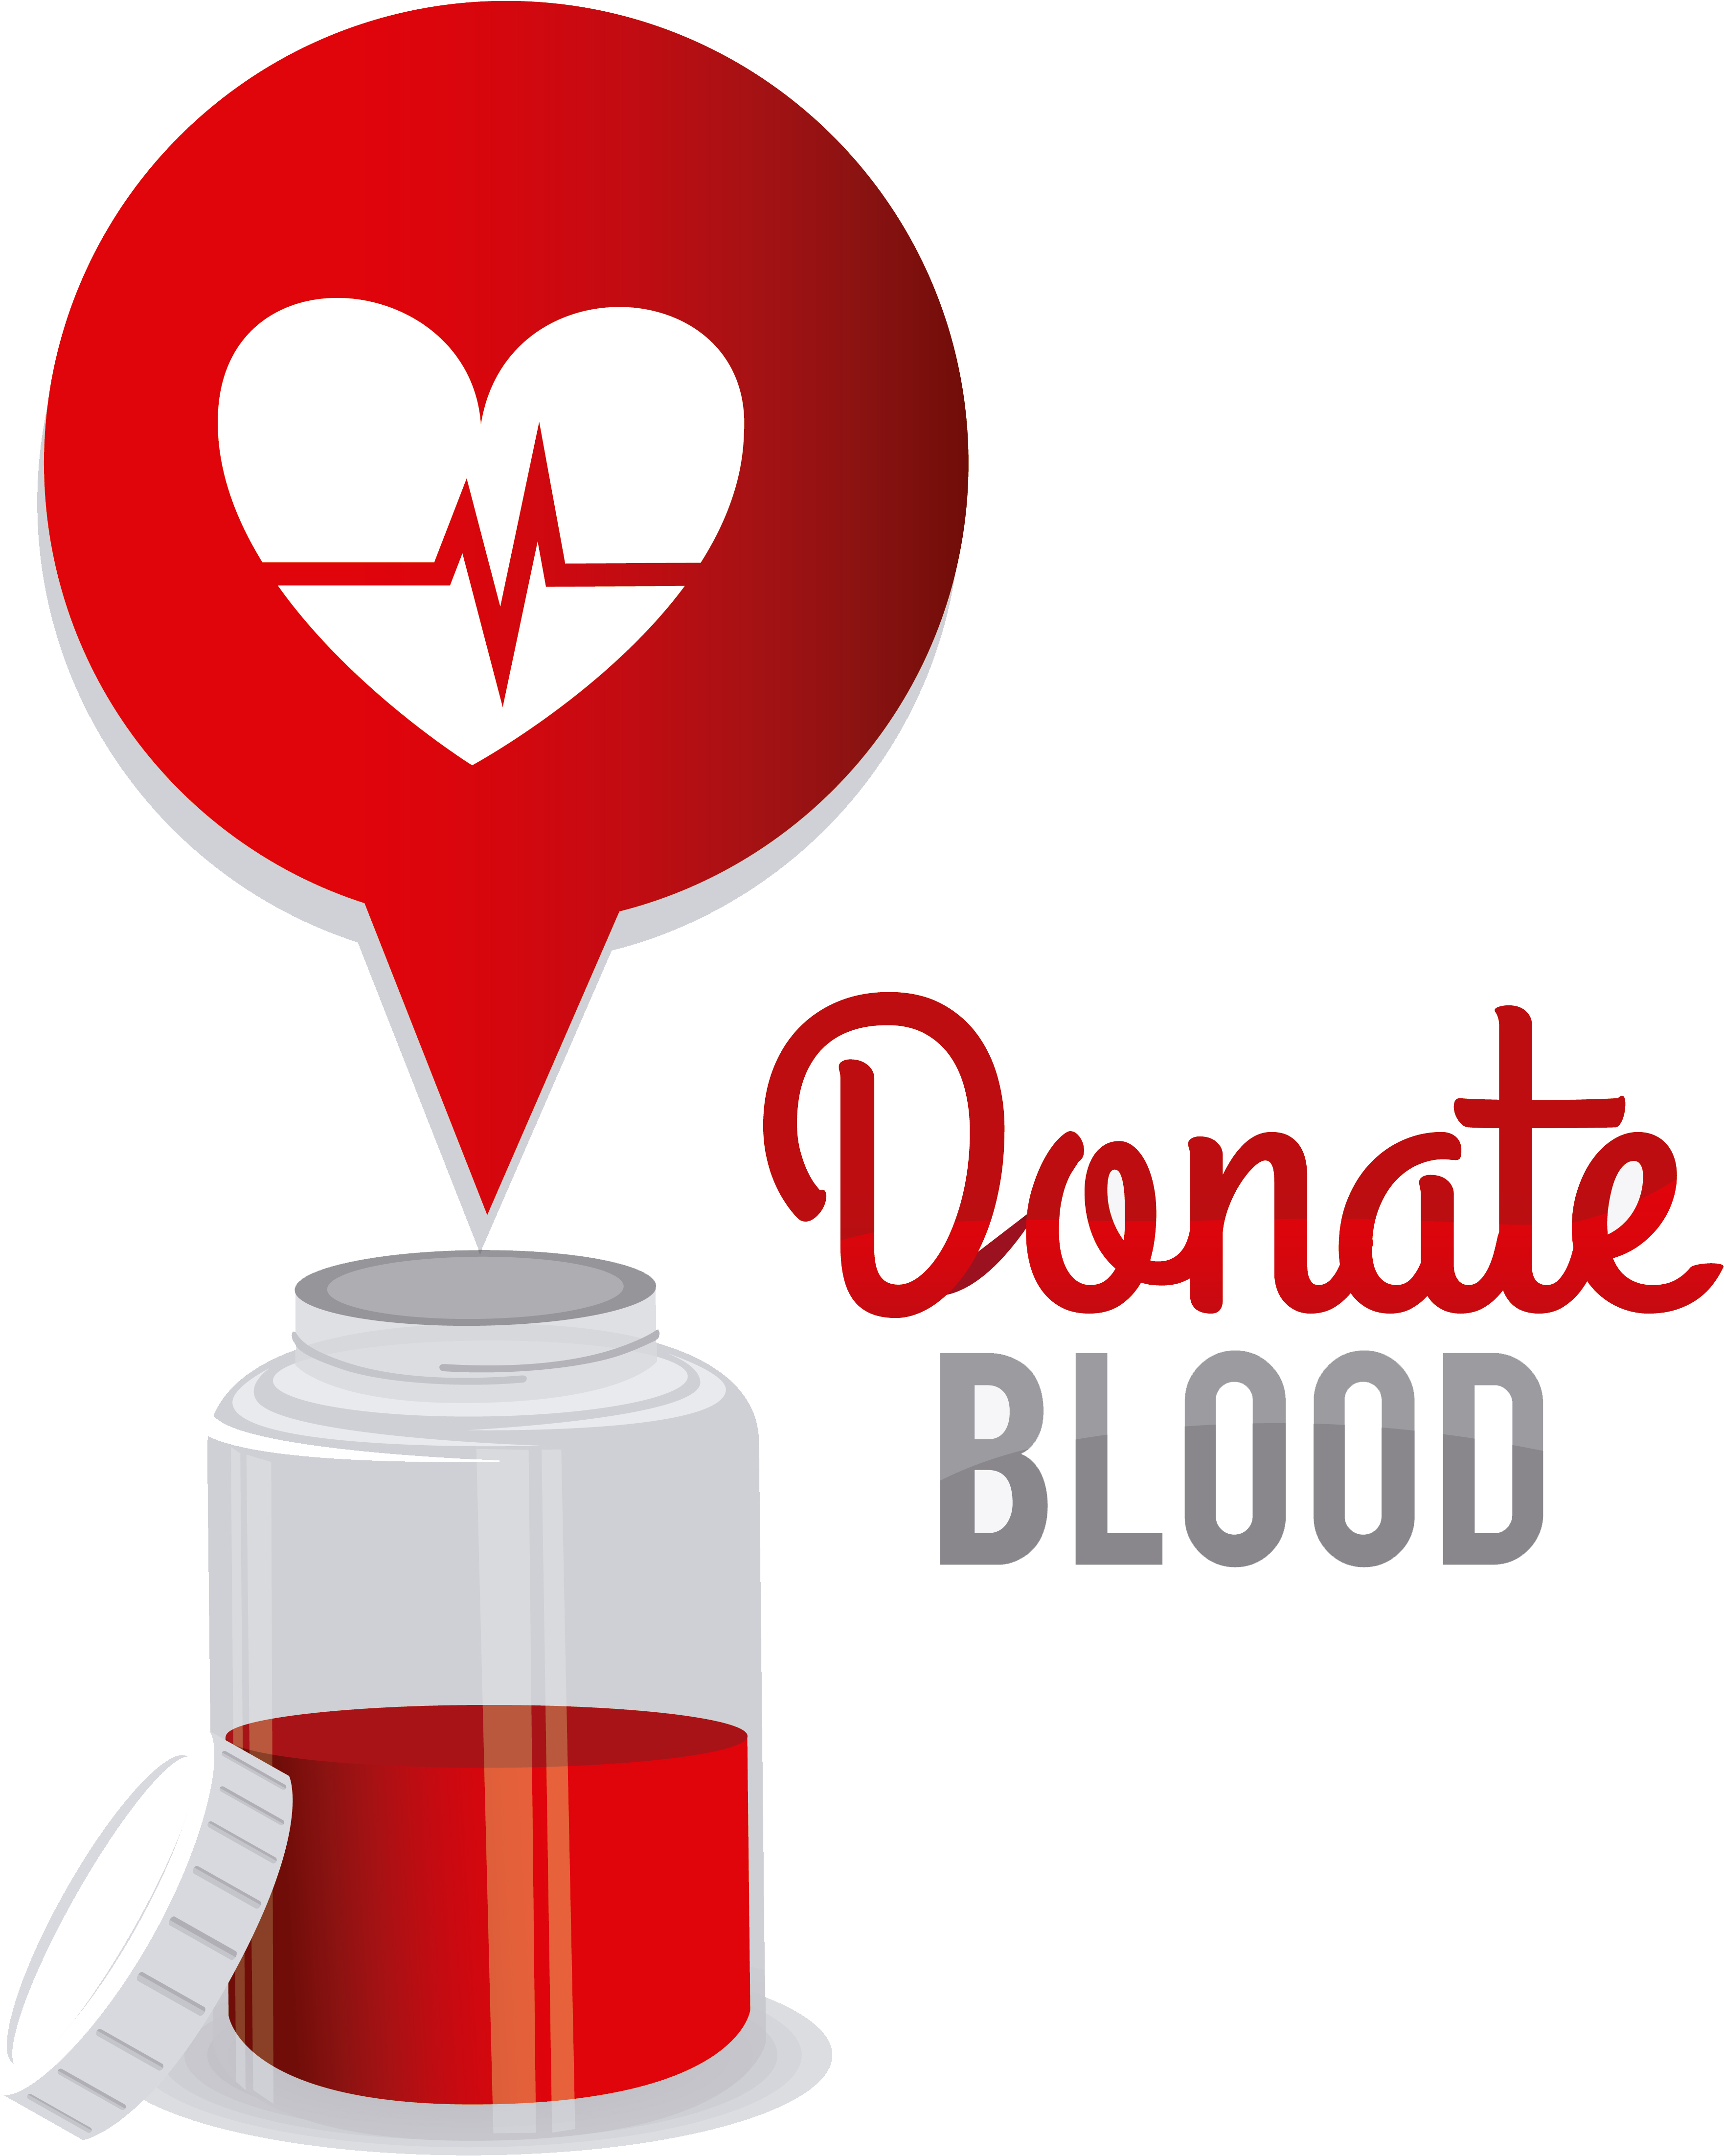 Blood Donation Of Medical Material - Blood Donation Logo Png (4937x5315)